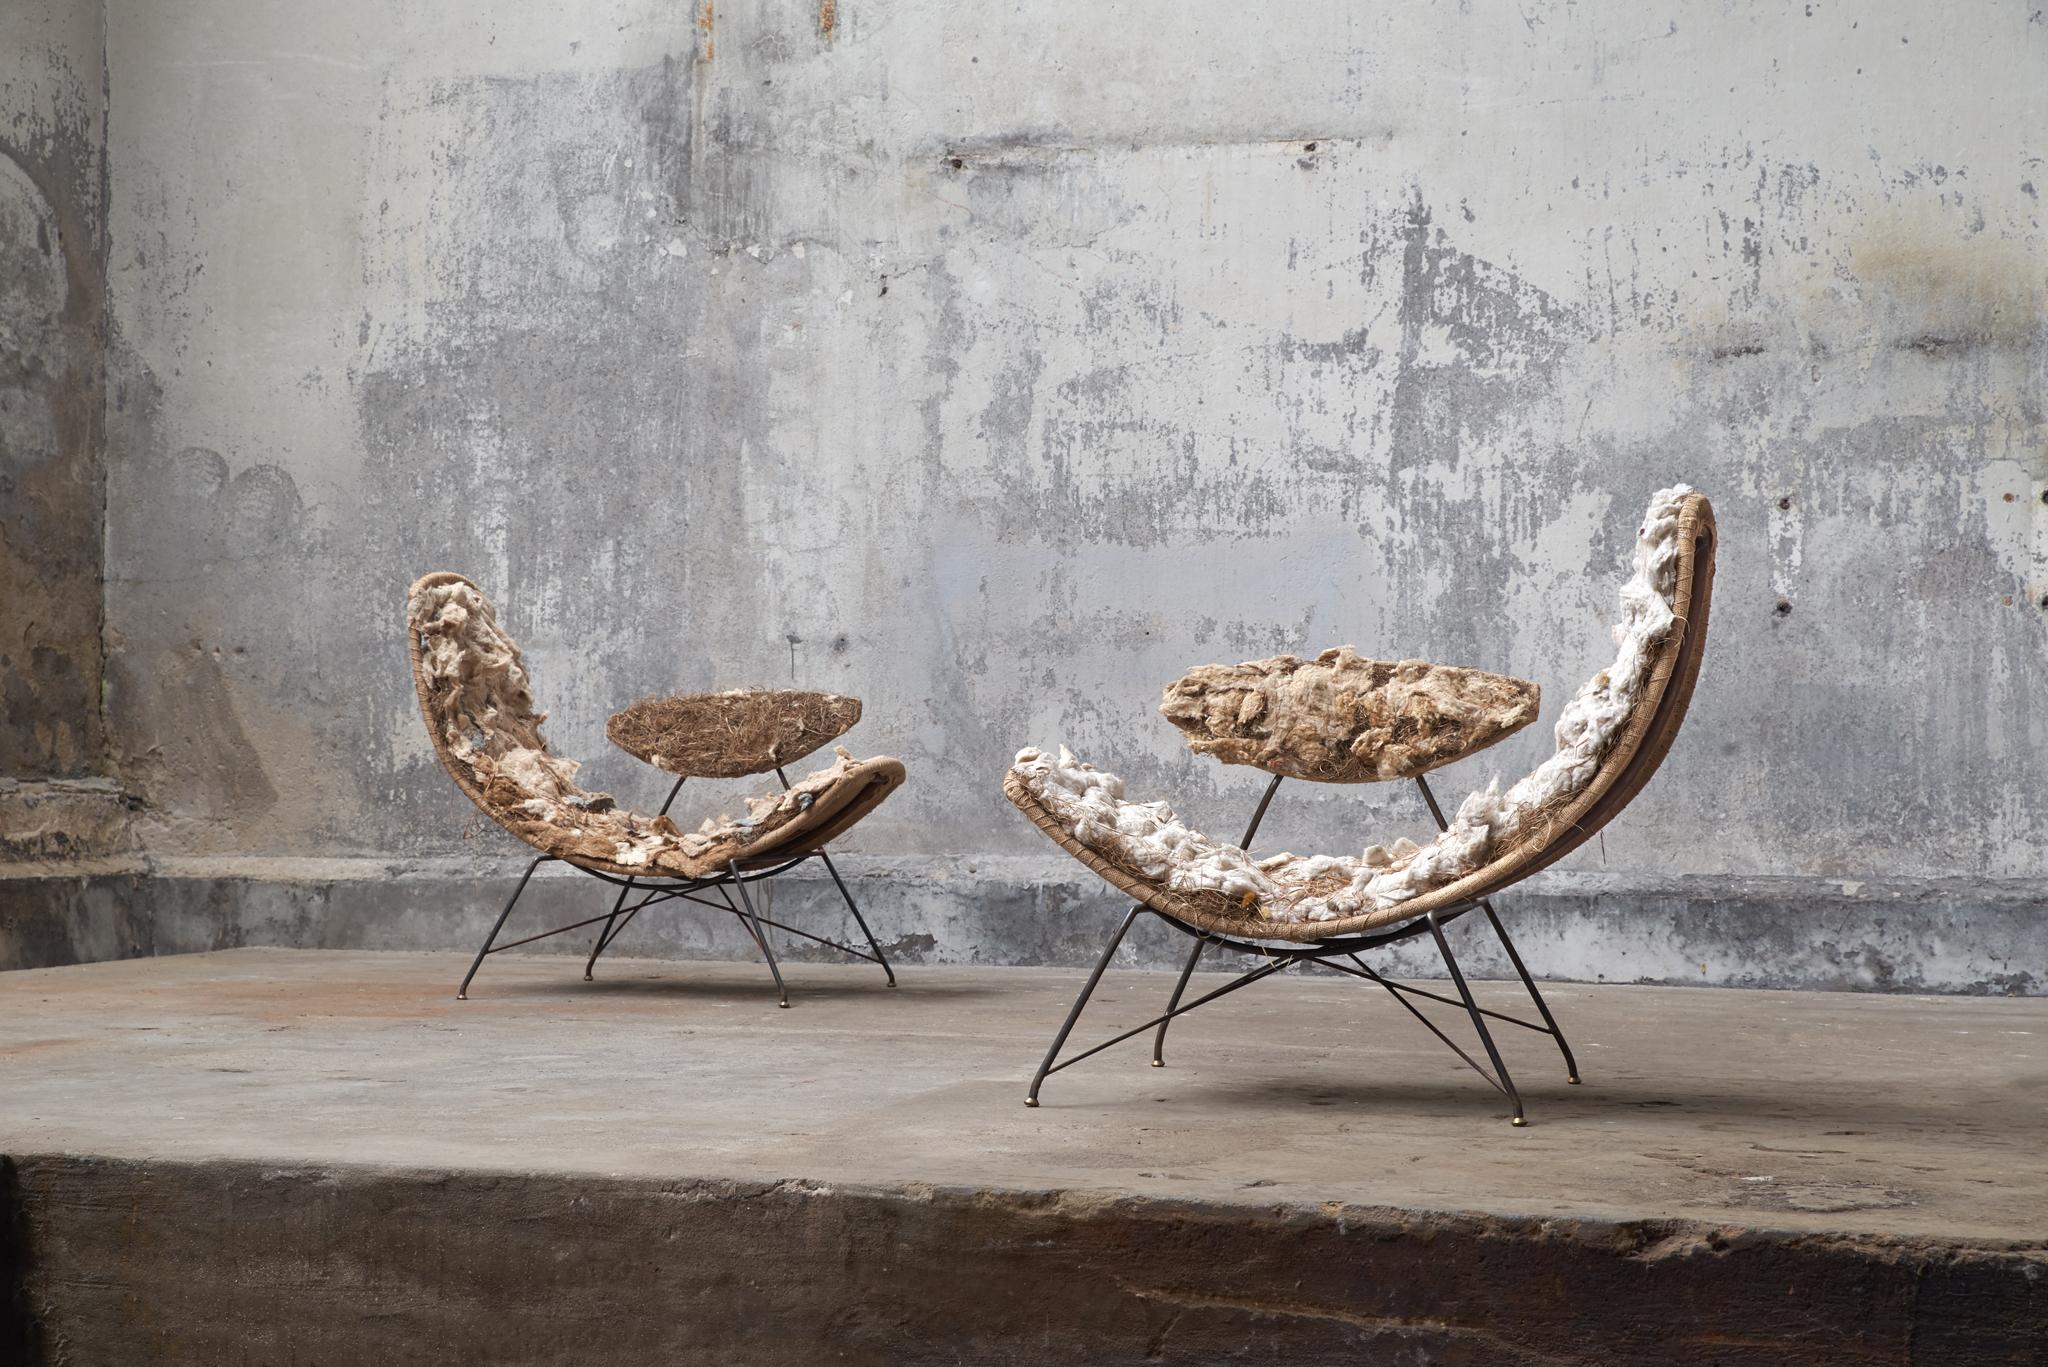 Martin Eisler, pair of early edition reversible chairs, iron, brass, Brazil, 1955.

Two early edition Eisler reversible chairs. These chairs feature only the use of original materials, consisting of a metal frame, brass feet and the interior made